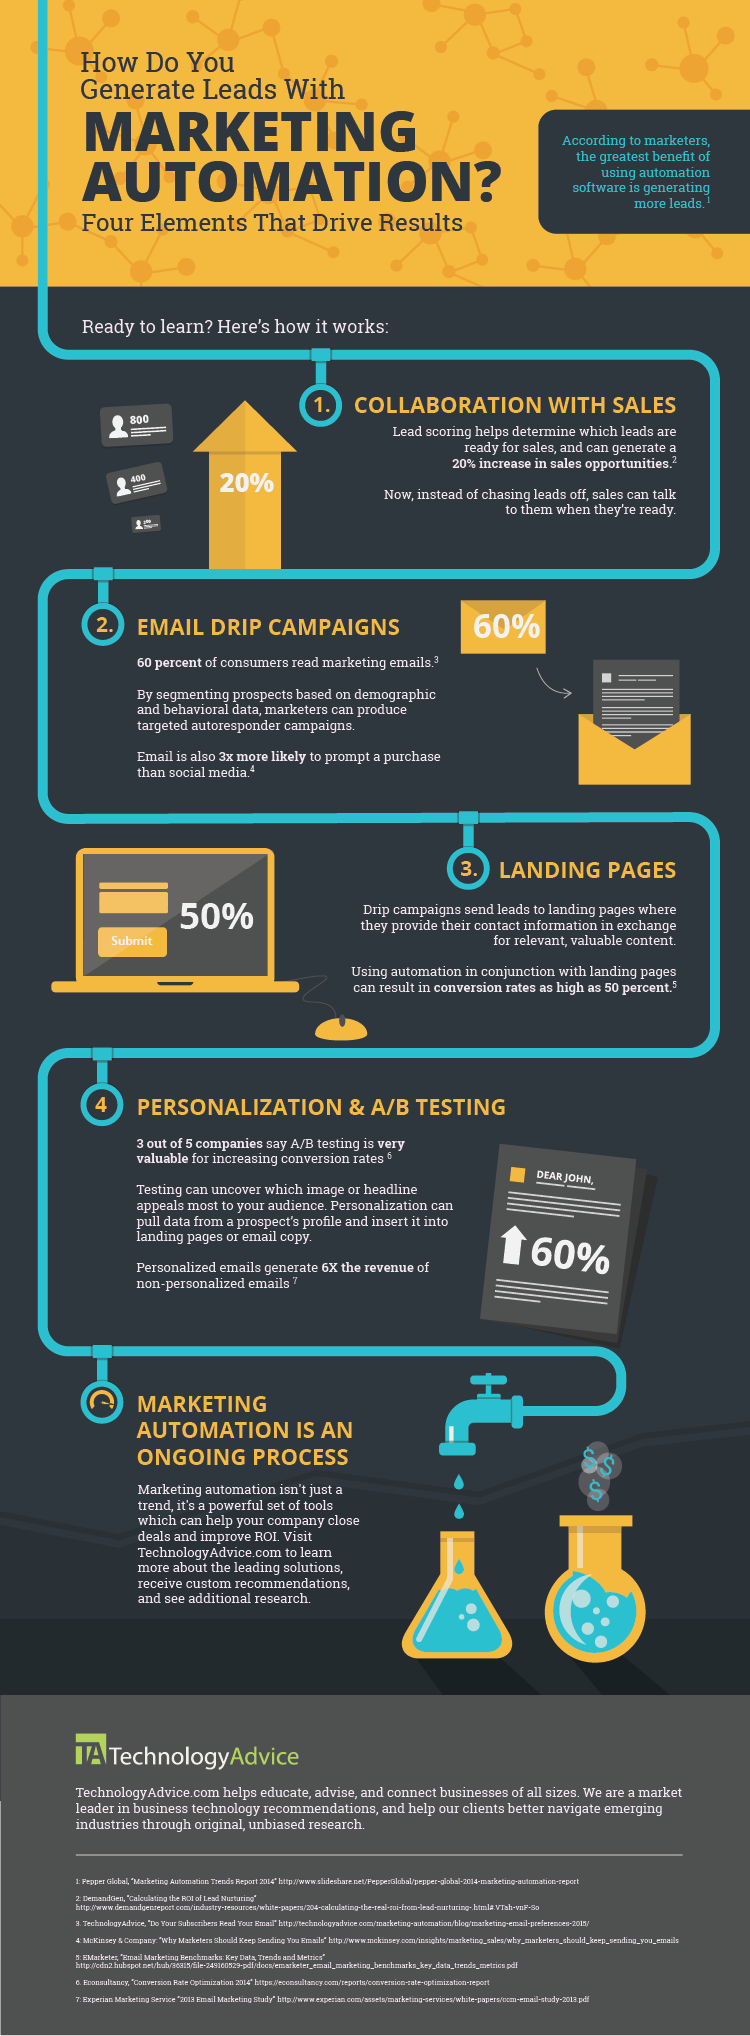 infographic on how to use marketing automation to generate leads